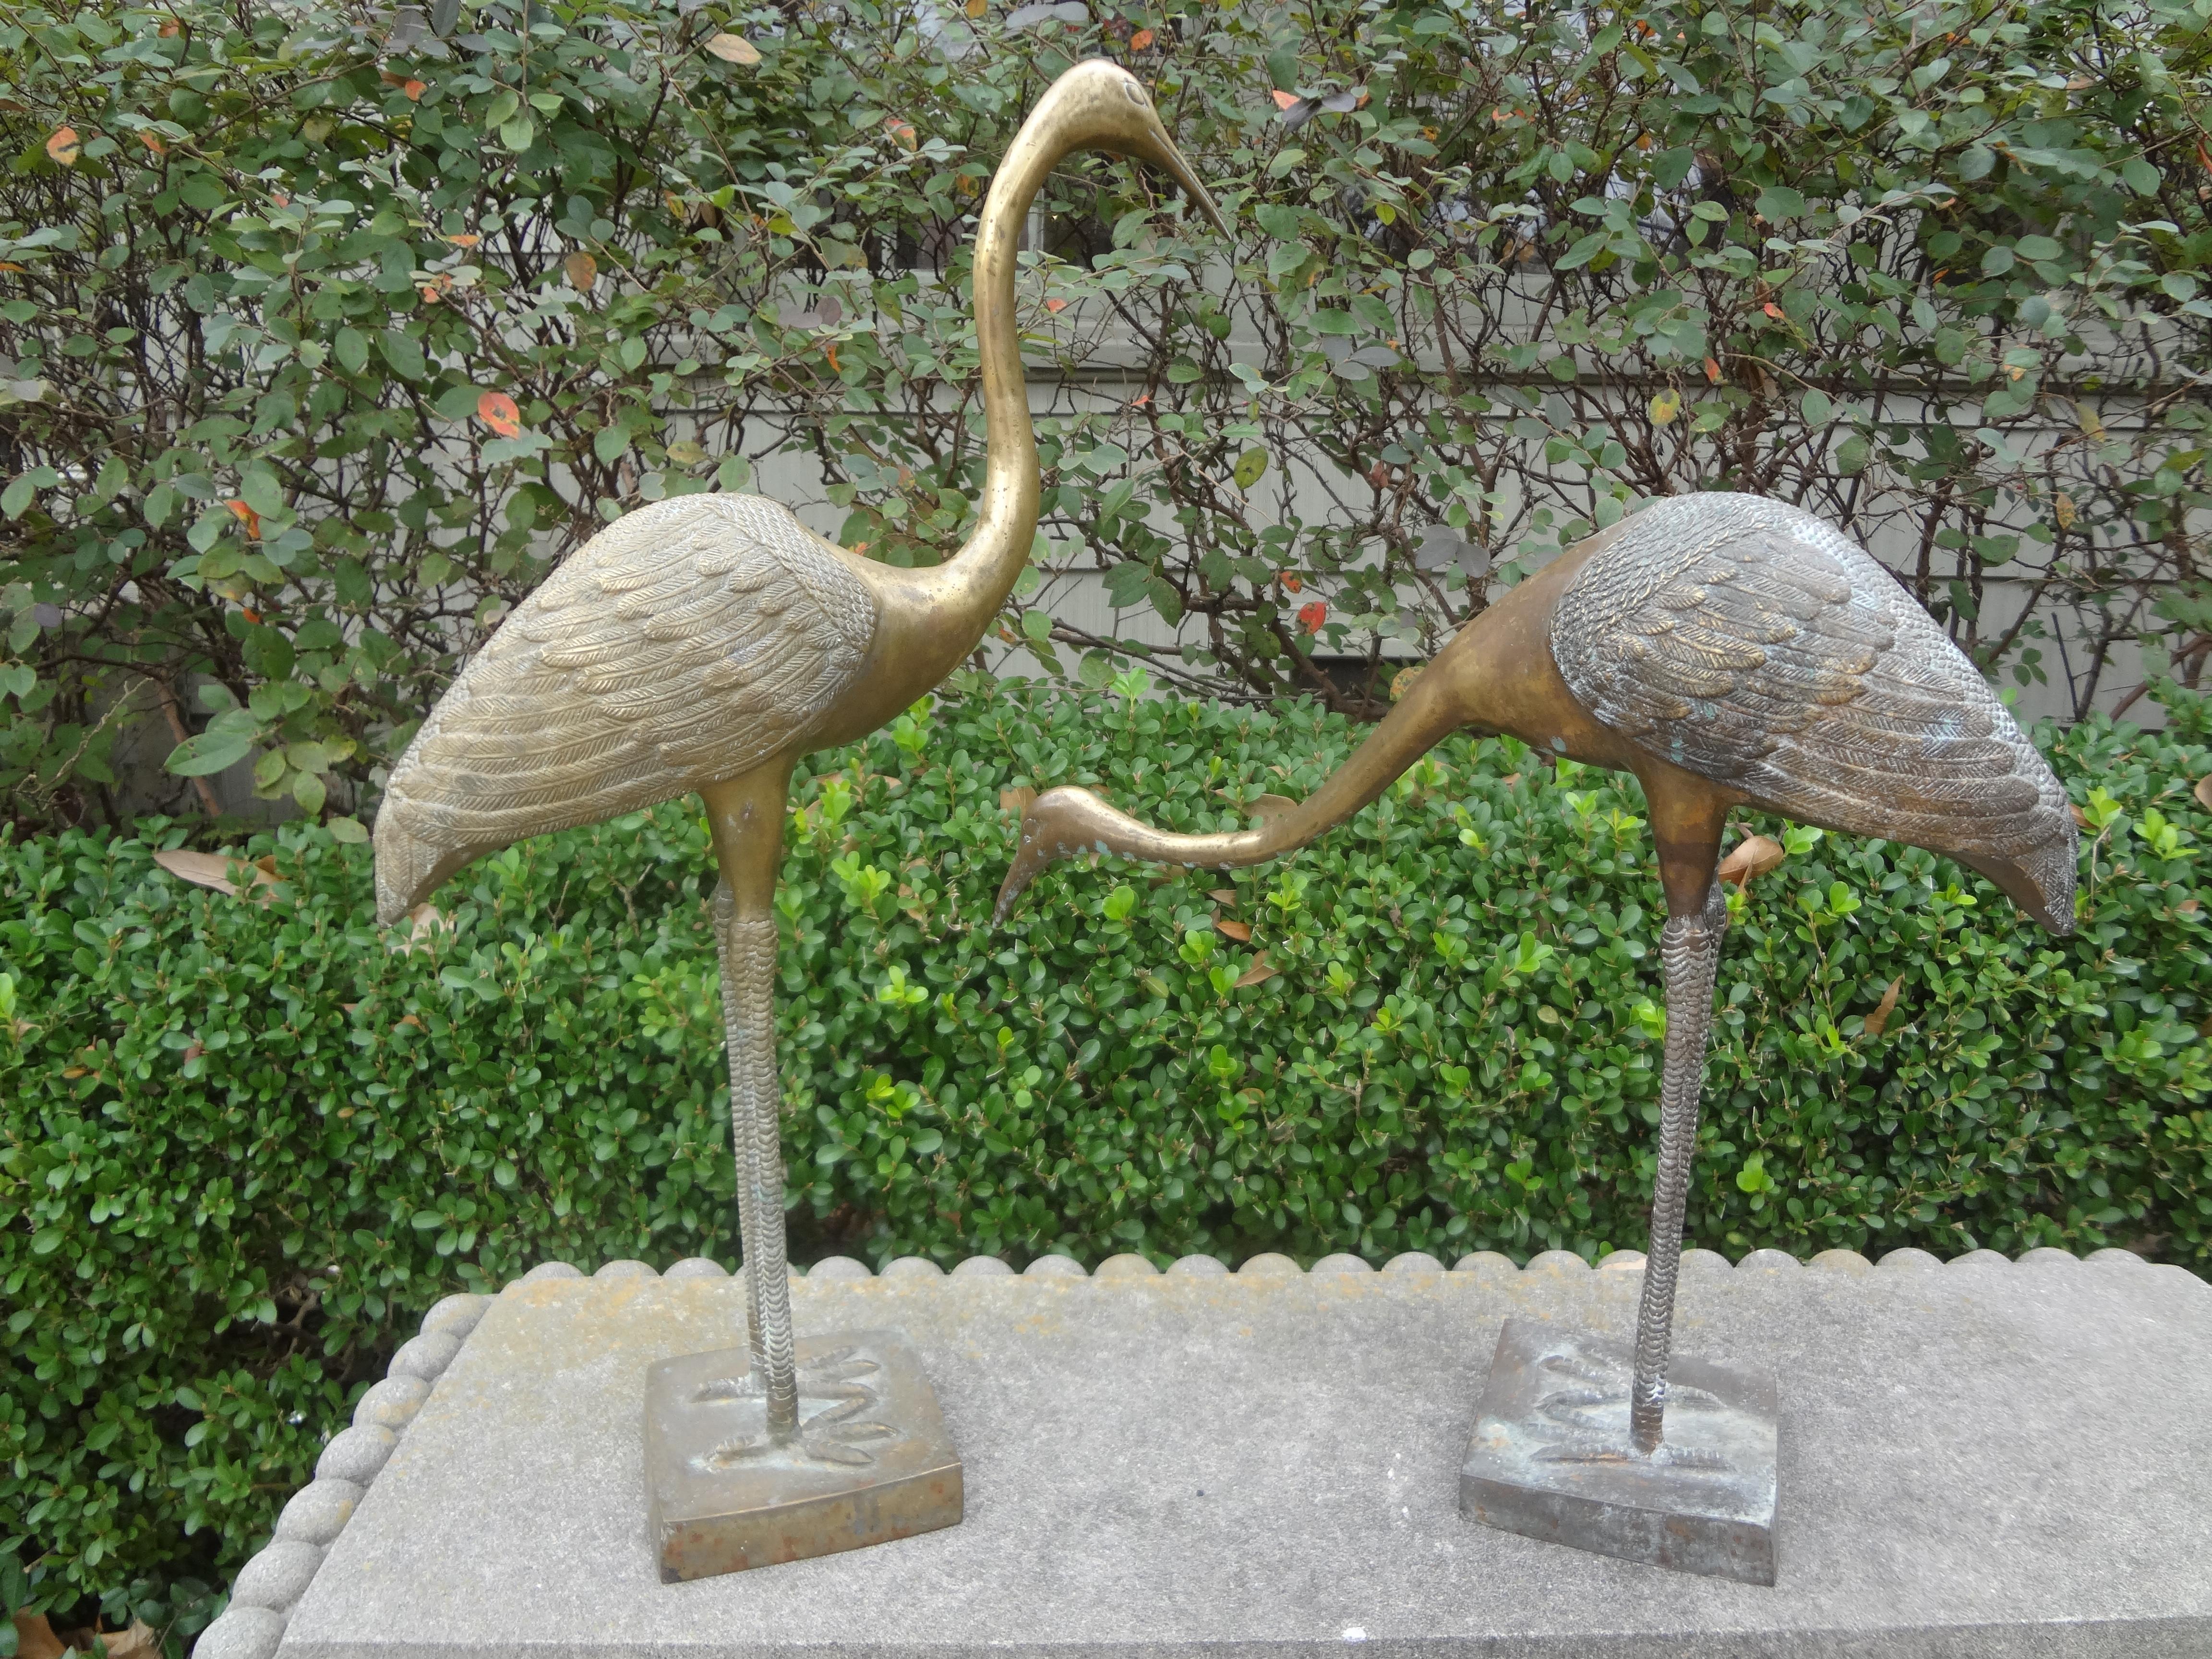 Pair of Hollywood Regency brass cranes. These stunning midcentury brass crane statues are well detailed and make great decorative accessories. Great patina. Can be polished if desired.
Measures: taller: 21.5 inches height
 16 inches width
 4.5